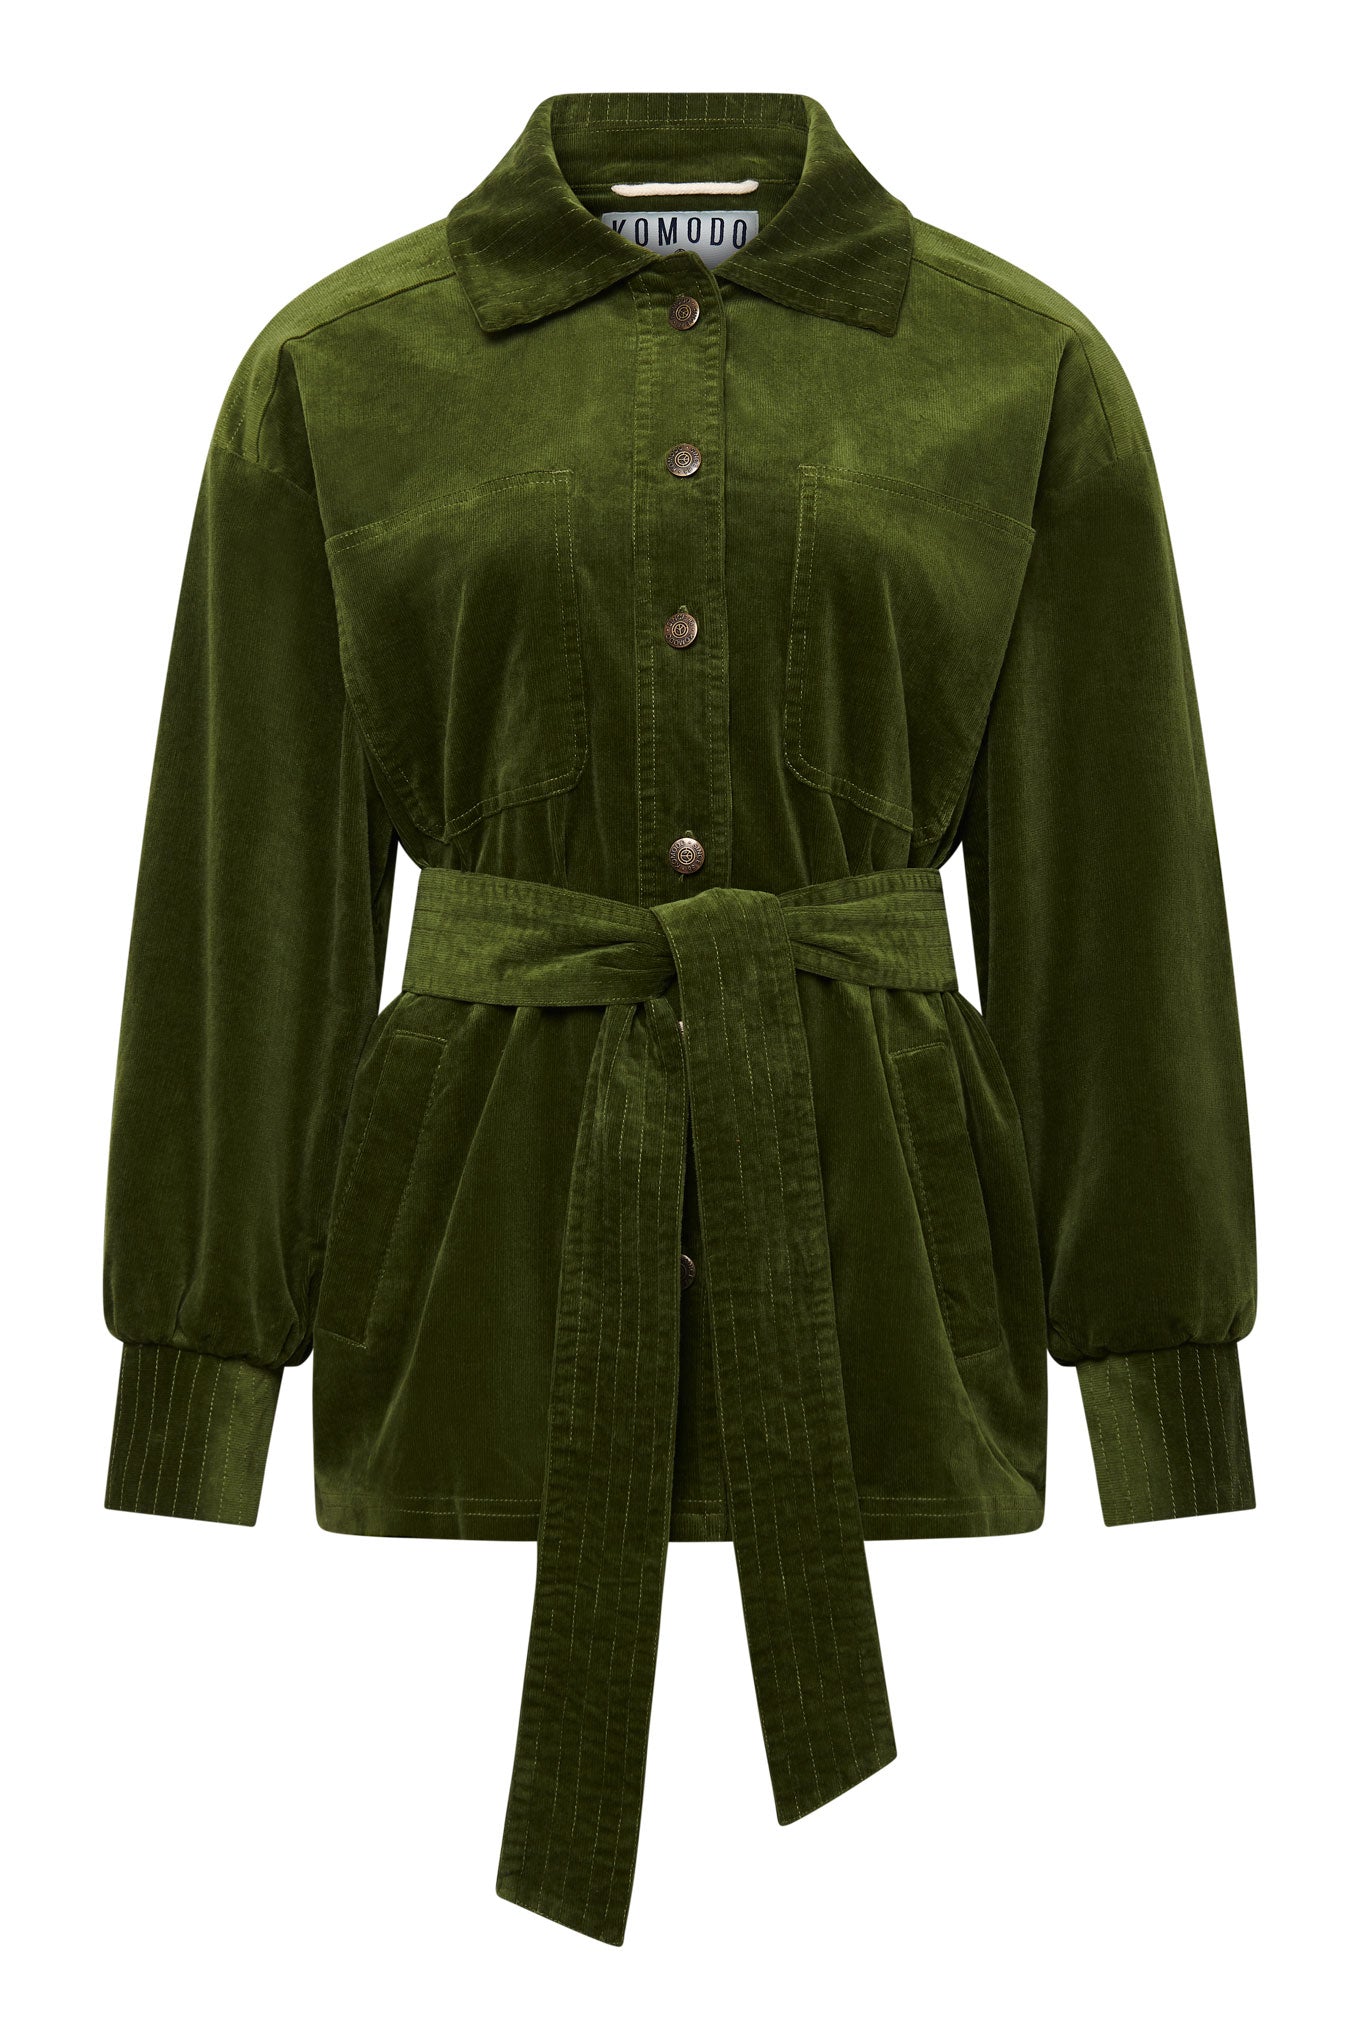 Green corduroy jacket APPOLINO made from 100% organic cotton from Komodo 